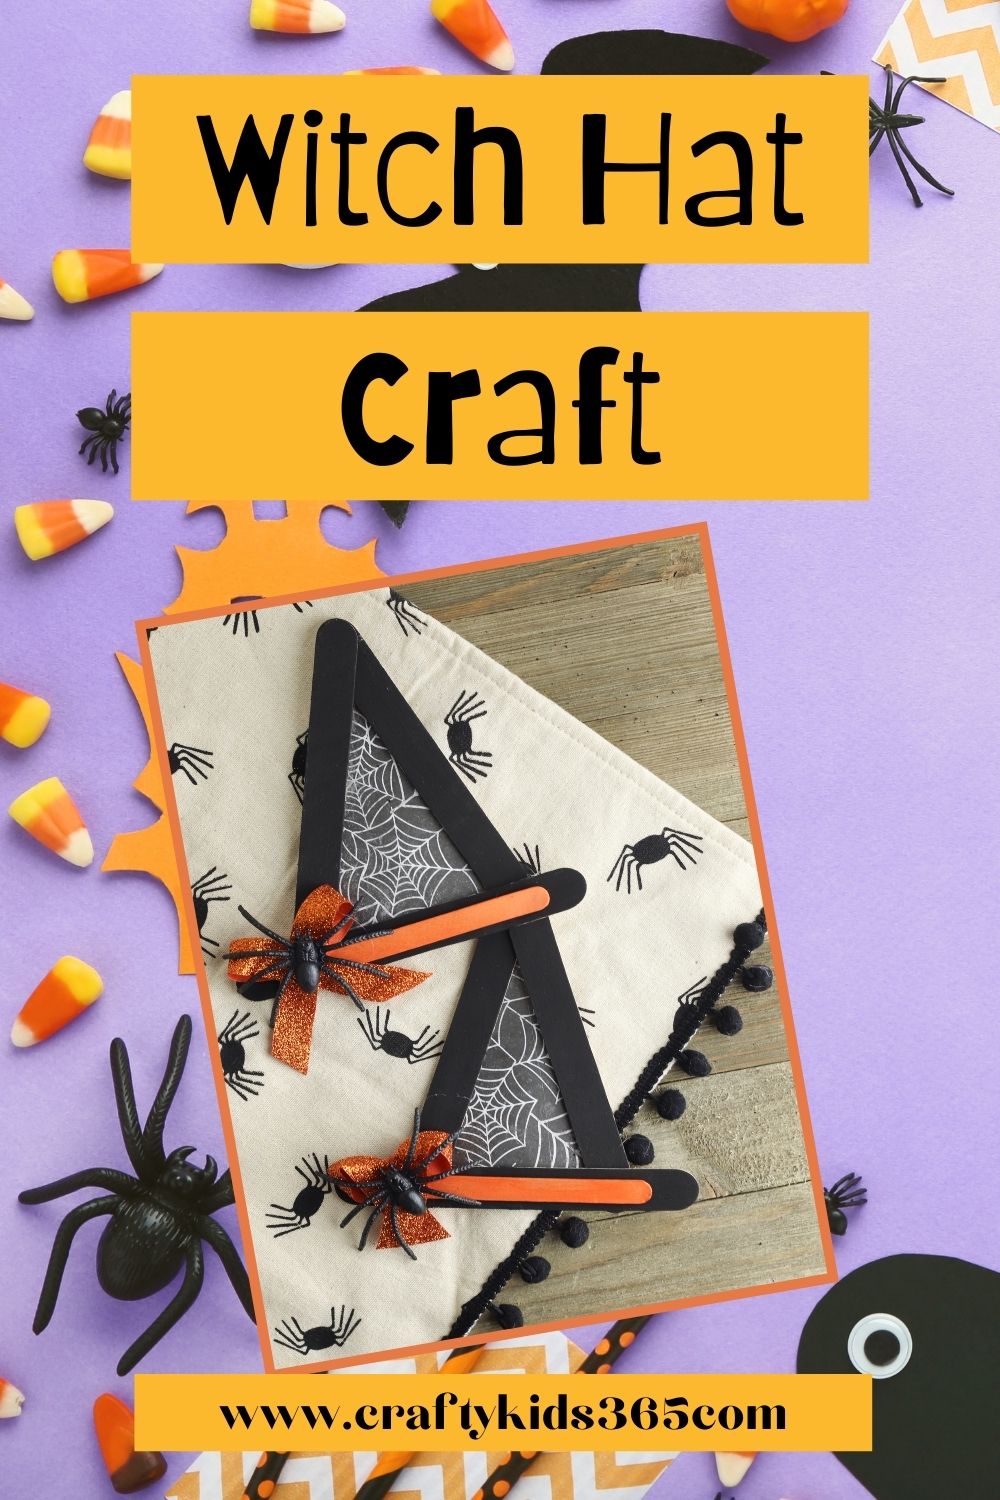 When you want to get into the Halloween spirit, this Witch Hat Craft is a must. You can create the perfect miniature witch hats with simple crafting supplies and then use these handmade items as decorations for your home, office, or classroom. This easy Halloween craft is perfect for young children too.